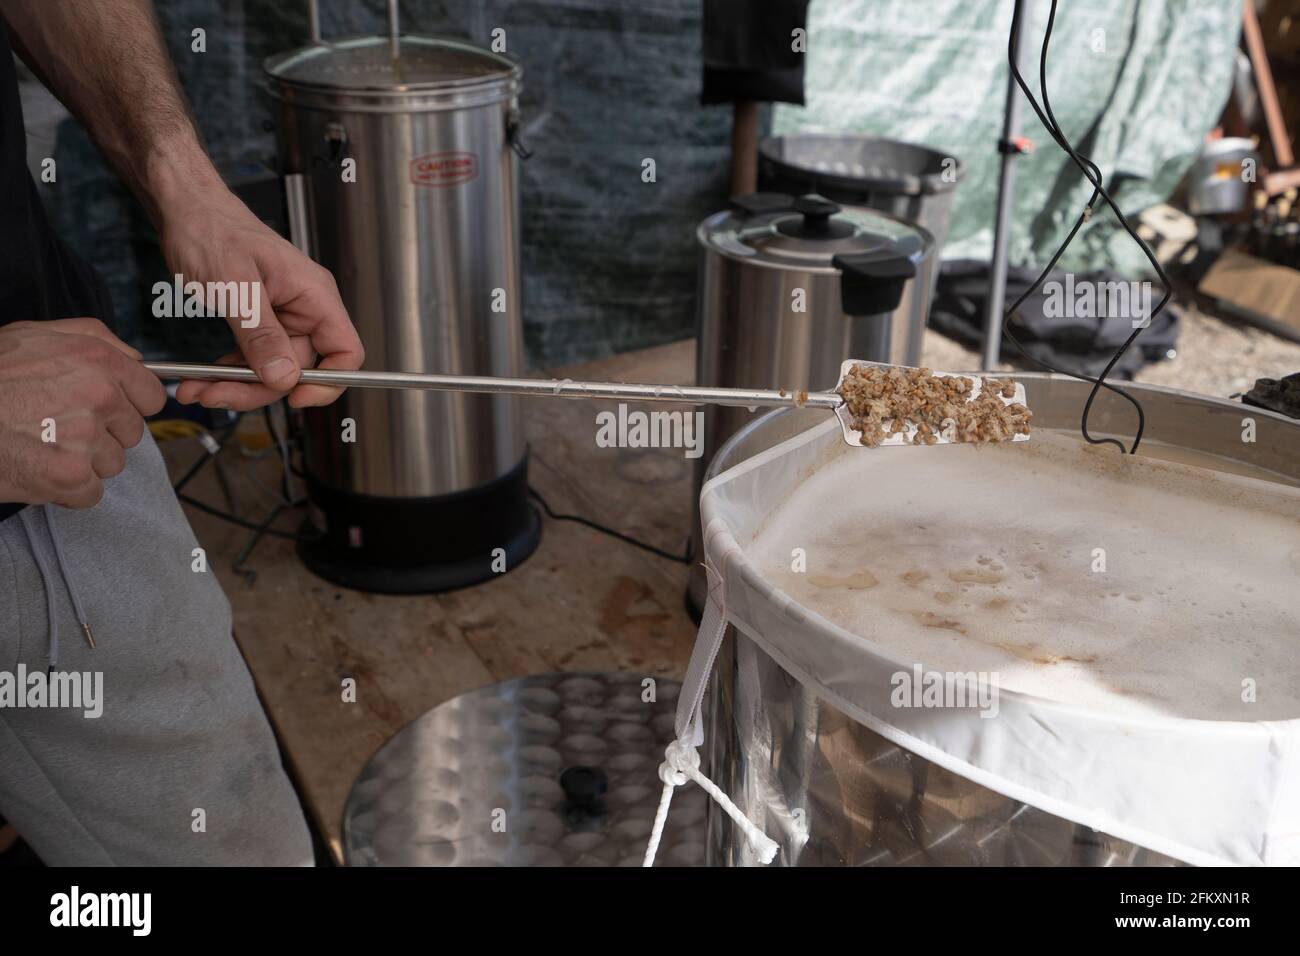 https://c8.alamy.com/comp/2FKXN1R/bag-of-mash-tun-in-a-brew-kettle-beer-making-process-at-home-close-u-2FKXN1R.jpg